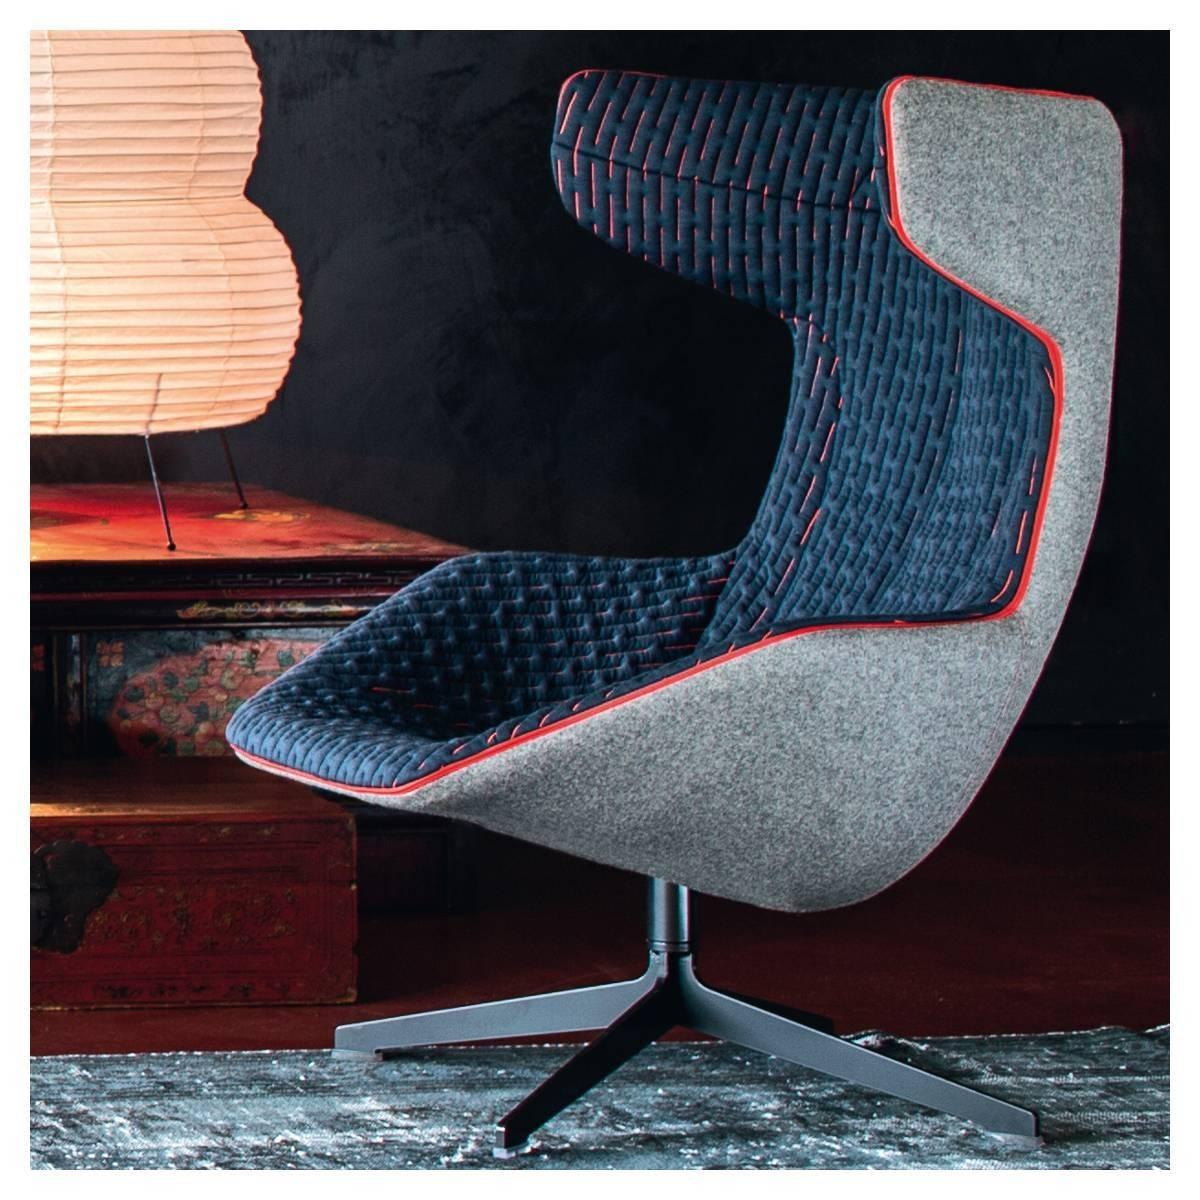 Moroso Take A Line For A Walk lounge chair in Quickship by Alfredo Haberli with removable quilt and swivel base.

Injected flame-retardant polyurethane foam over internal steel frame. Removable quilt with zippers is polyester/polyamide/ool/elas- tan